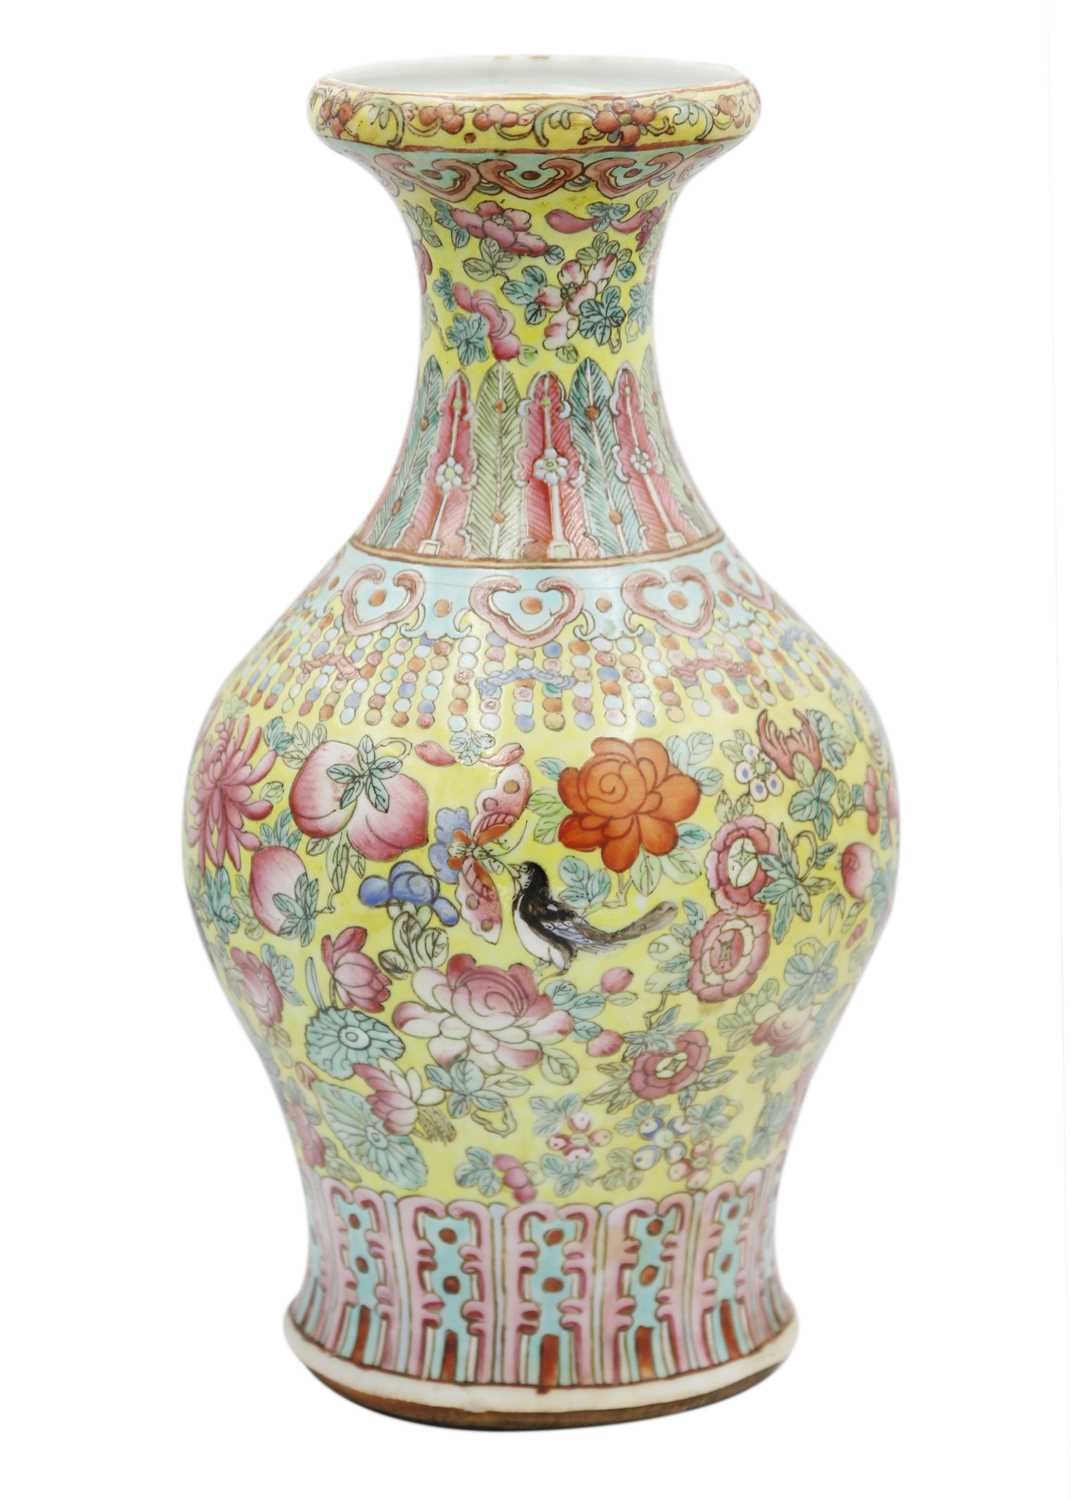 A Chinese famille juan porcelain vase, Tongzhi mark and period. (1861-1874) - Image 3 of 7